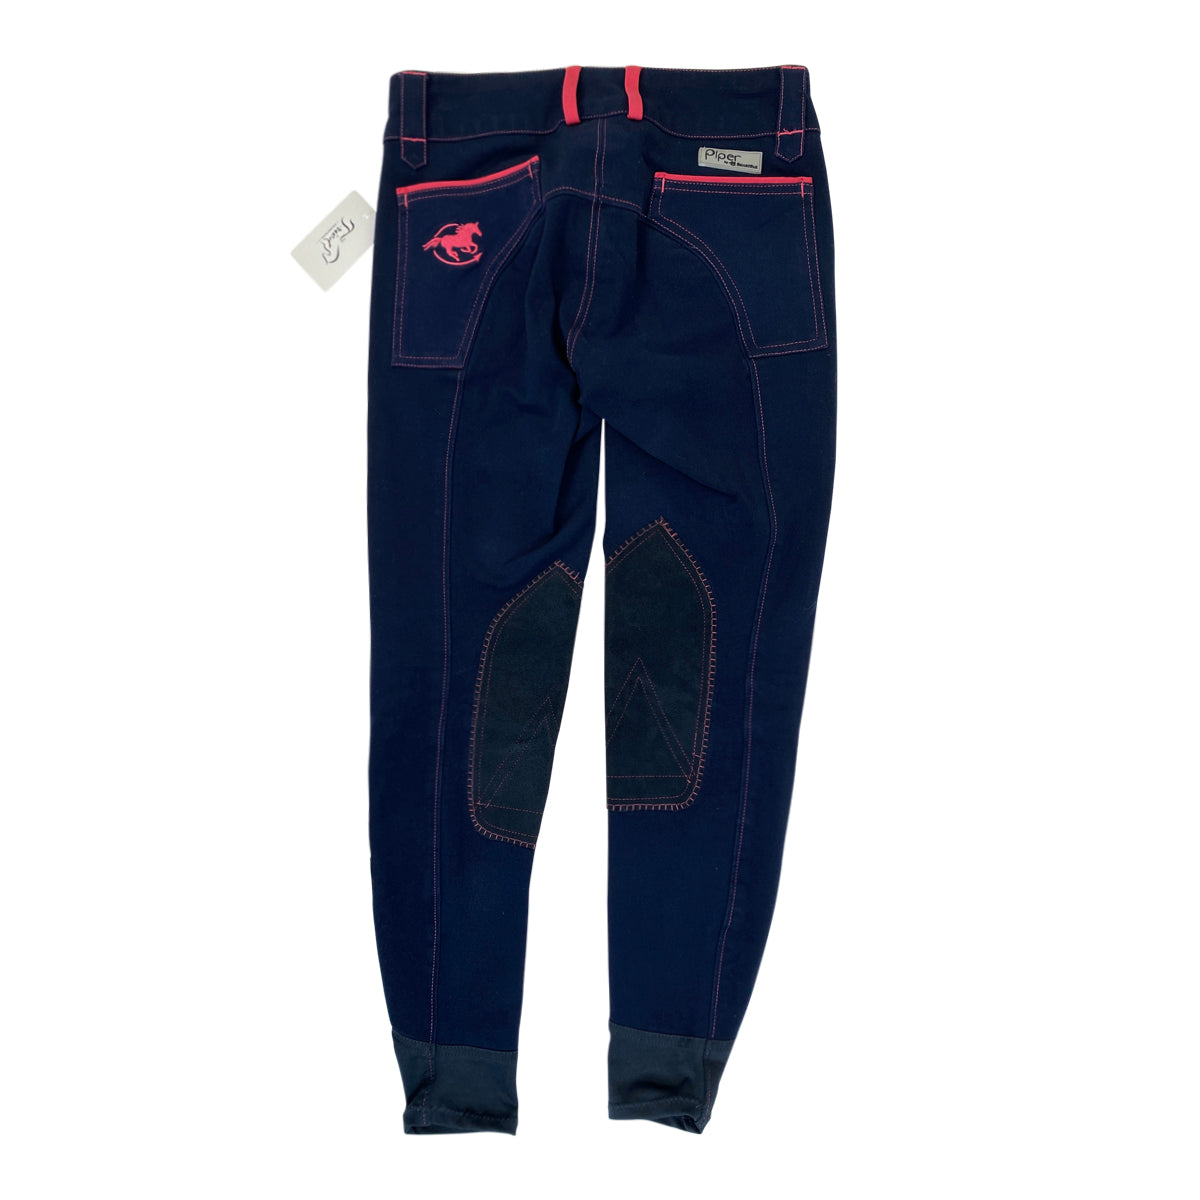 SmartPak 'Piper Evolution' Knee Patch Breeches in Navy w/Pink